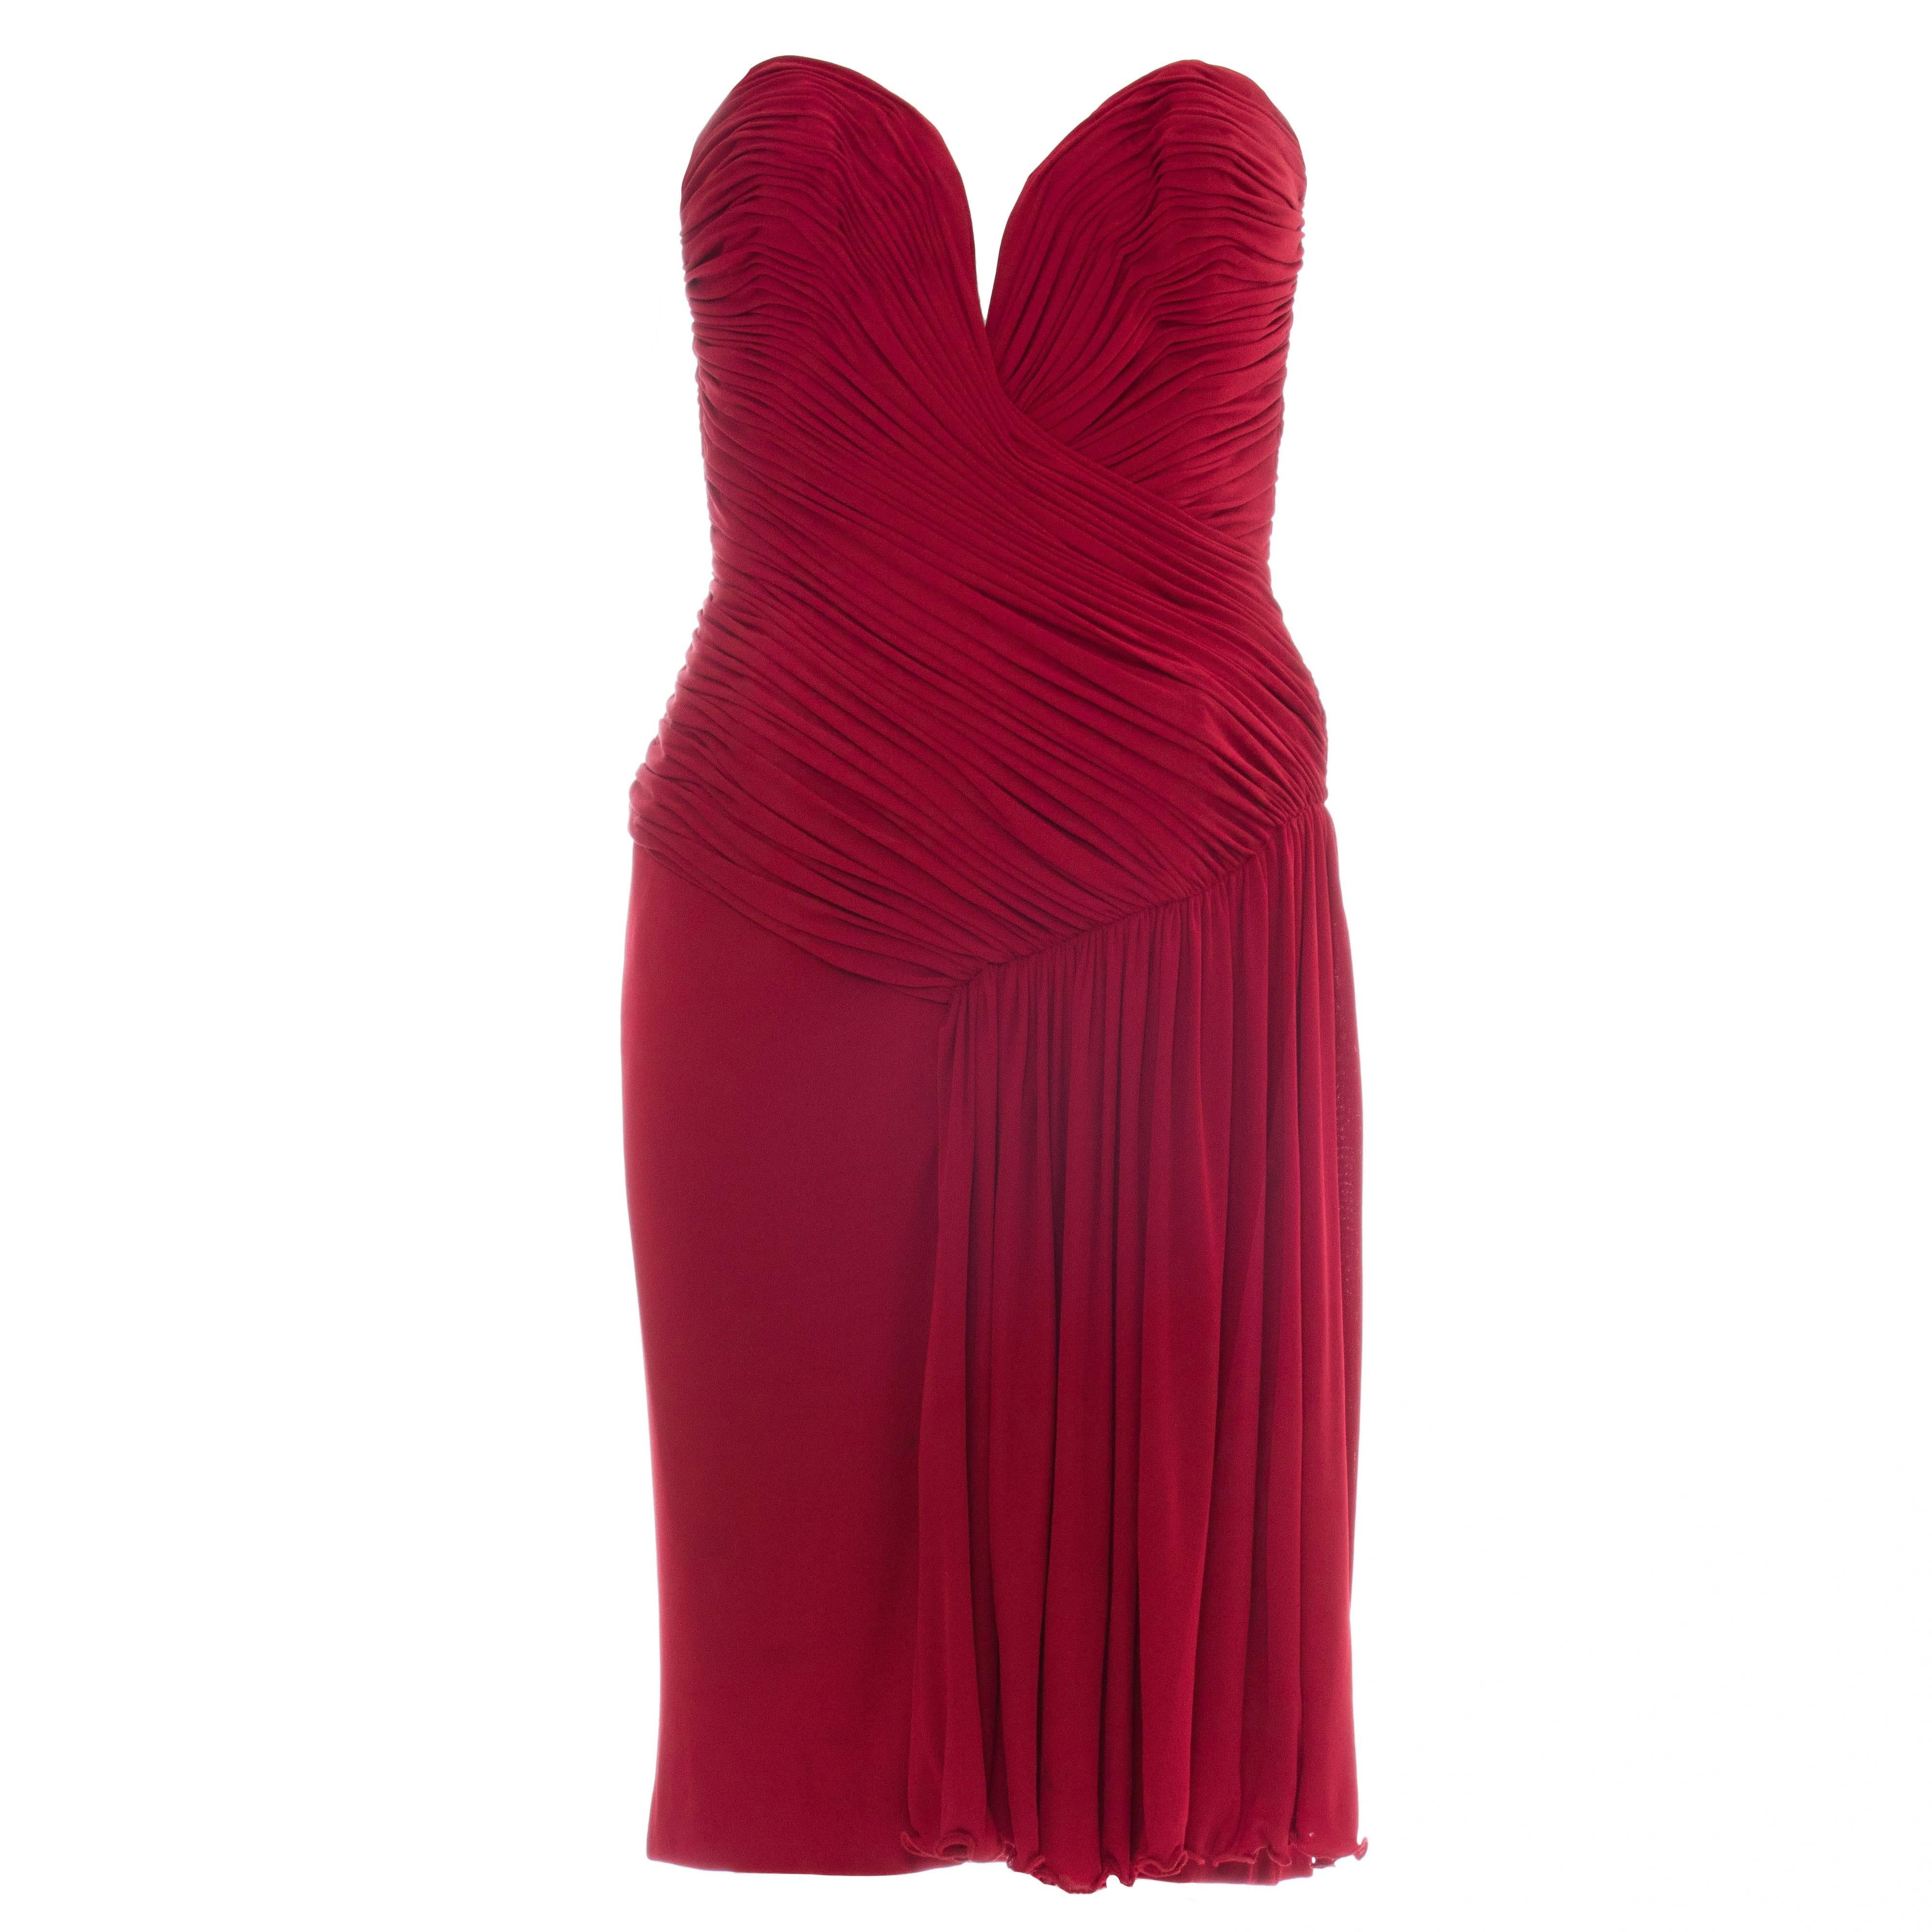 Vicky Tiel Couture Red Strapless Dress With Ruched Bodice, Circa 1980's For Sale